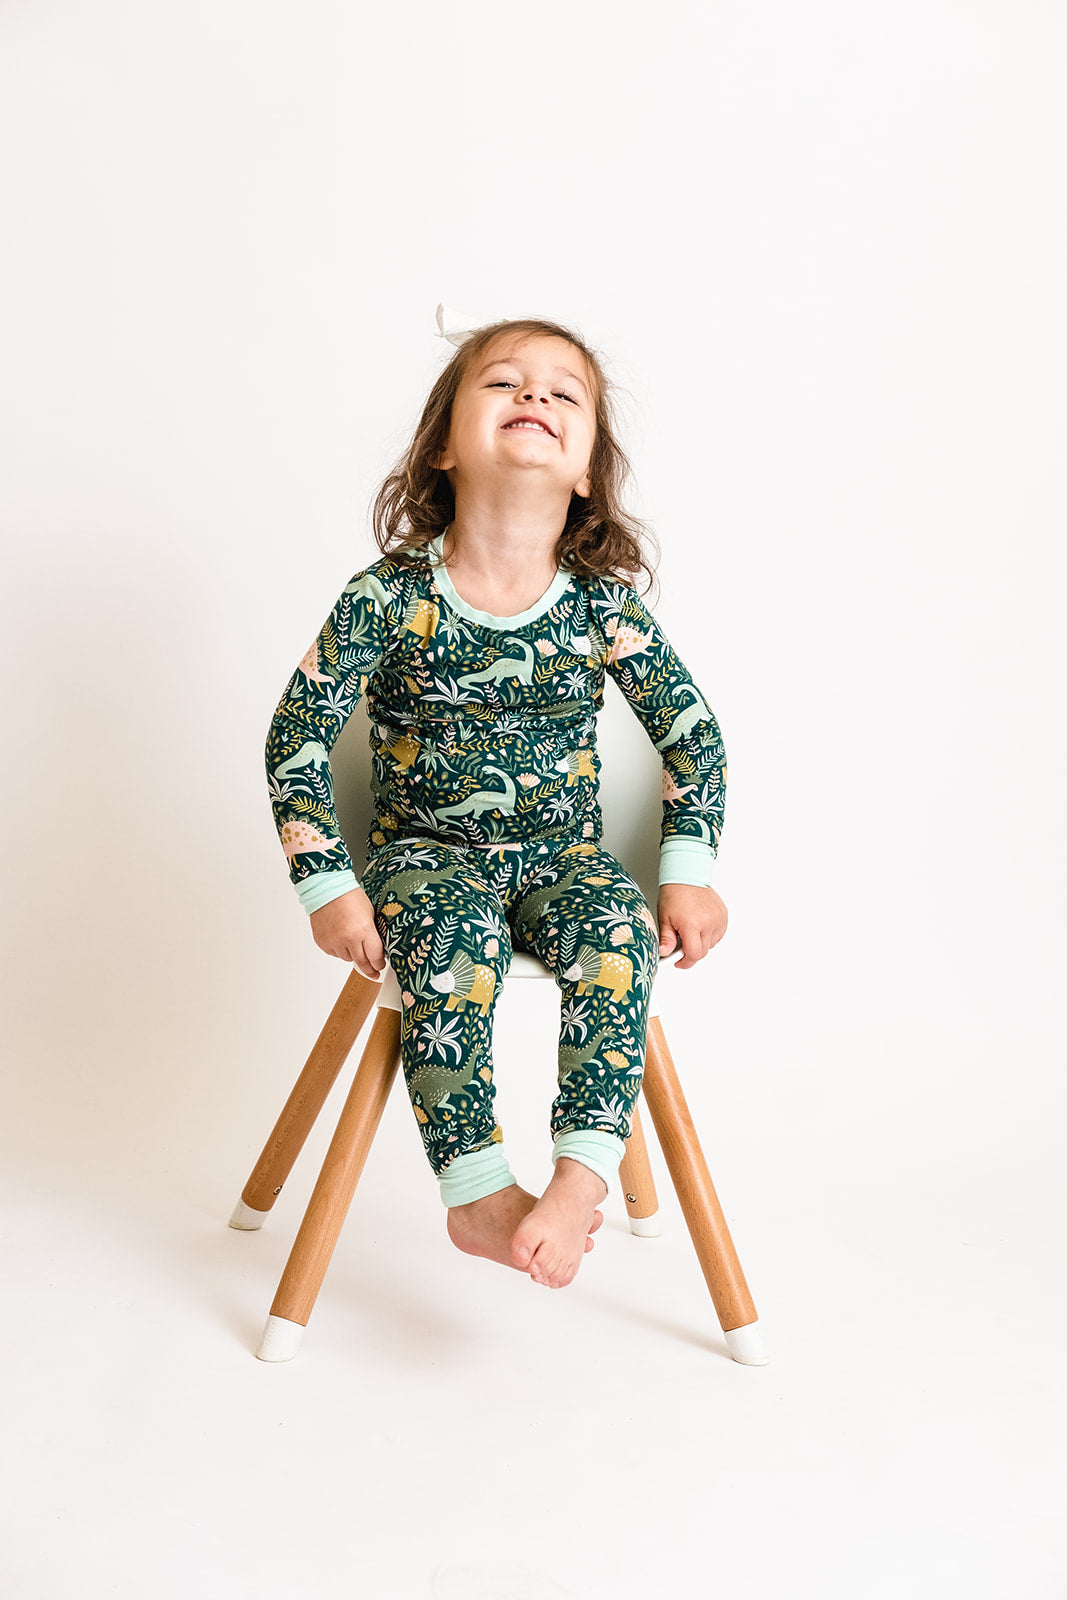 Dreamin of Dinos Toddler Jammie